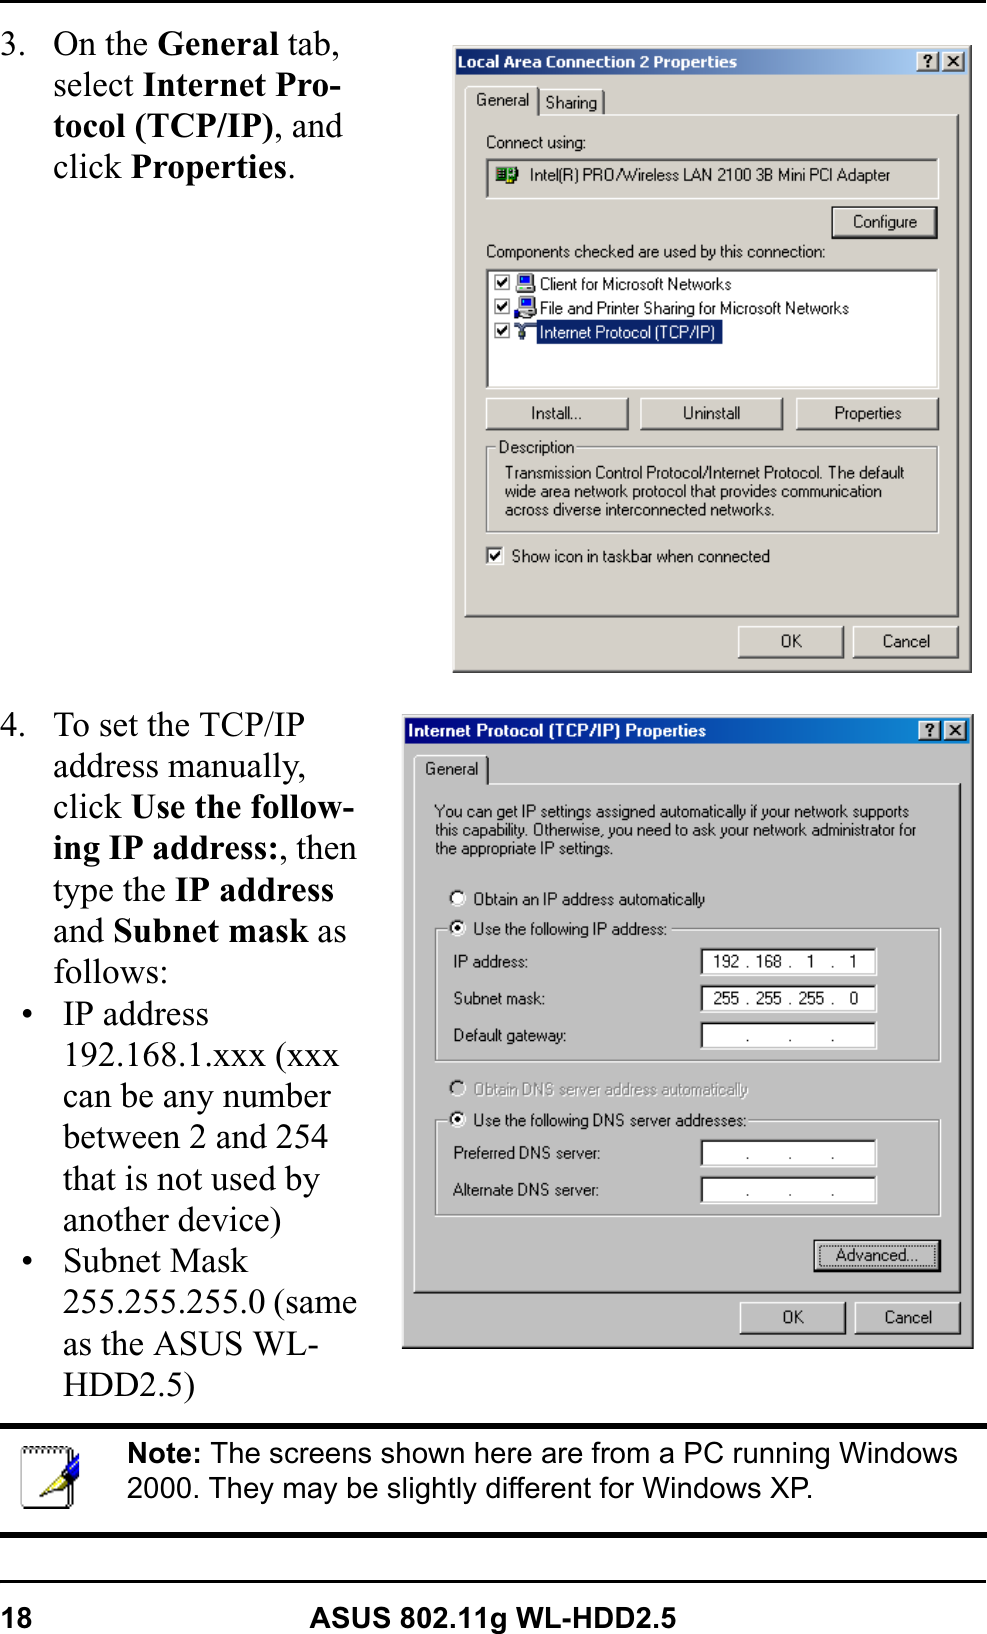 18 ASUS 802.11g WL-HDD2.53. On the General tab, select Internet Pro-tocol (TCP/IP), and click Properties.4. To set the TCP/IP address manually, click Use the follow-ing IP address:, then type the IP addressand Subnet mask as follows:• IP address 192.168.1.xxx (xxx can be any number between 2 and 254 that is not used by another device)• Subnet Mask 255.255.255.0 (same as the ASUS WL-HDD2.5)Note: The screens shown here are from a PC running Windows 2000. They may be slightly different for Windows XP.